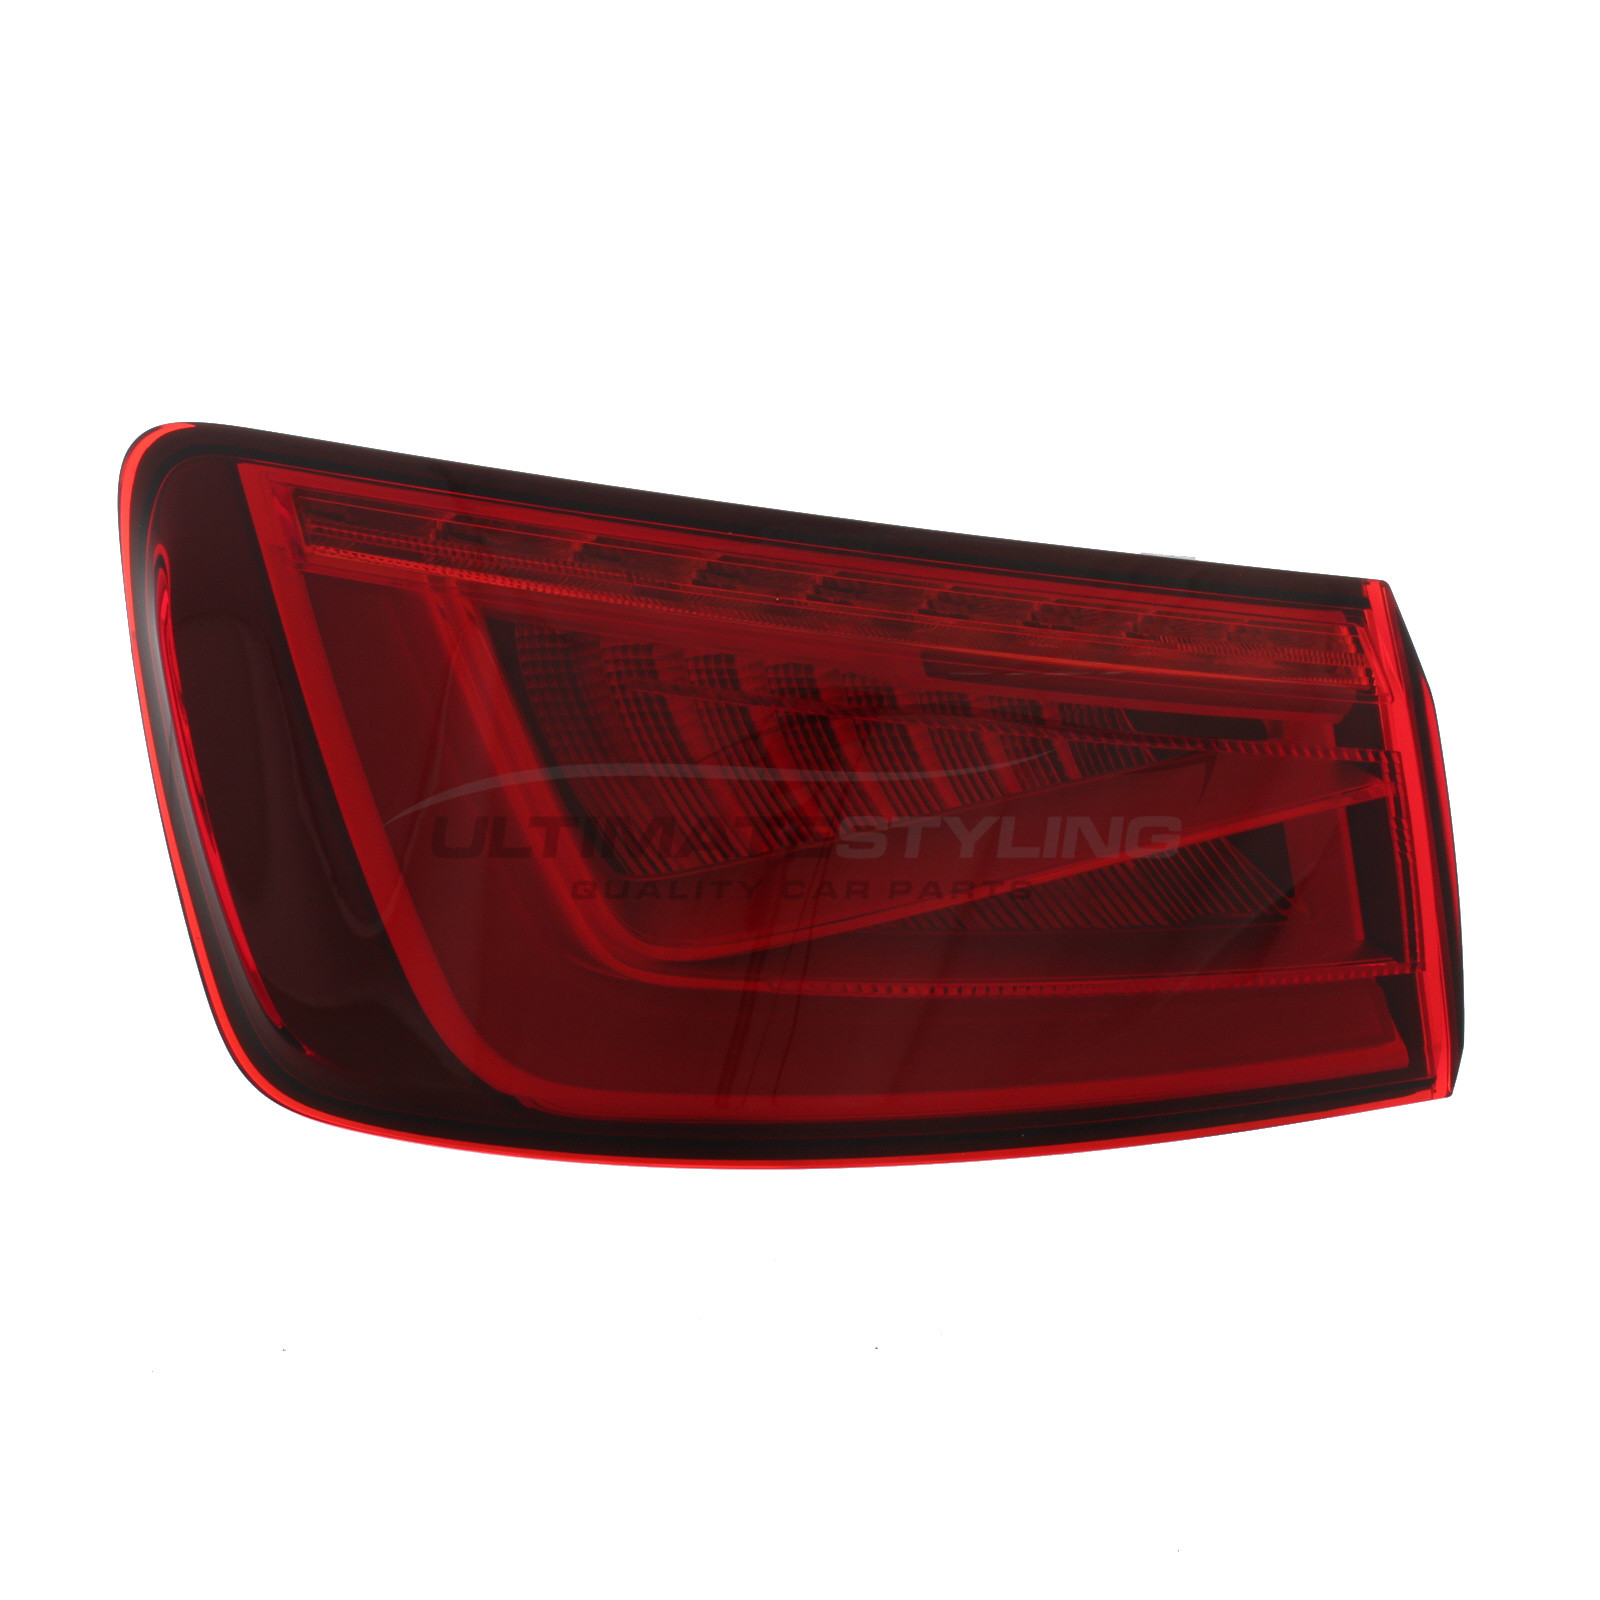 Audi A3 2013-2016 / Audi S3 2014-2016 LED with Red Indicator Outer (Wing) Rear Light / Tail Light Including Bulb Holder Passenger Side (LH)